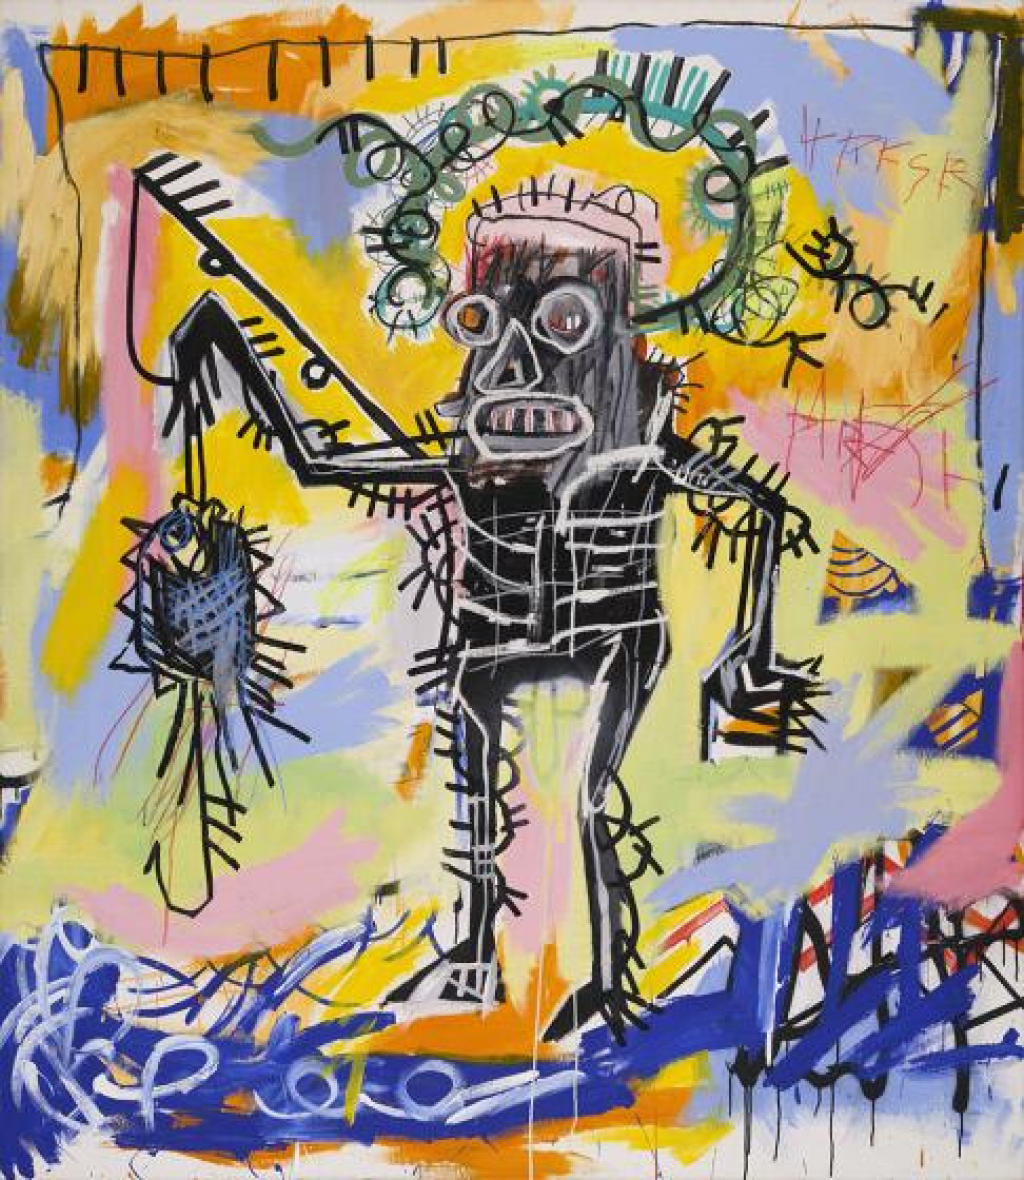 How The World Saw Basquiat’s Paintings